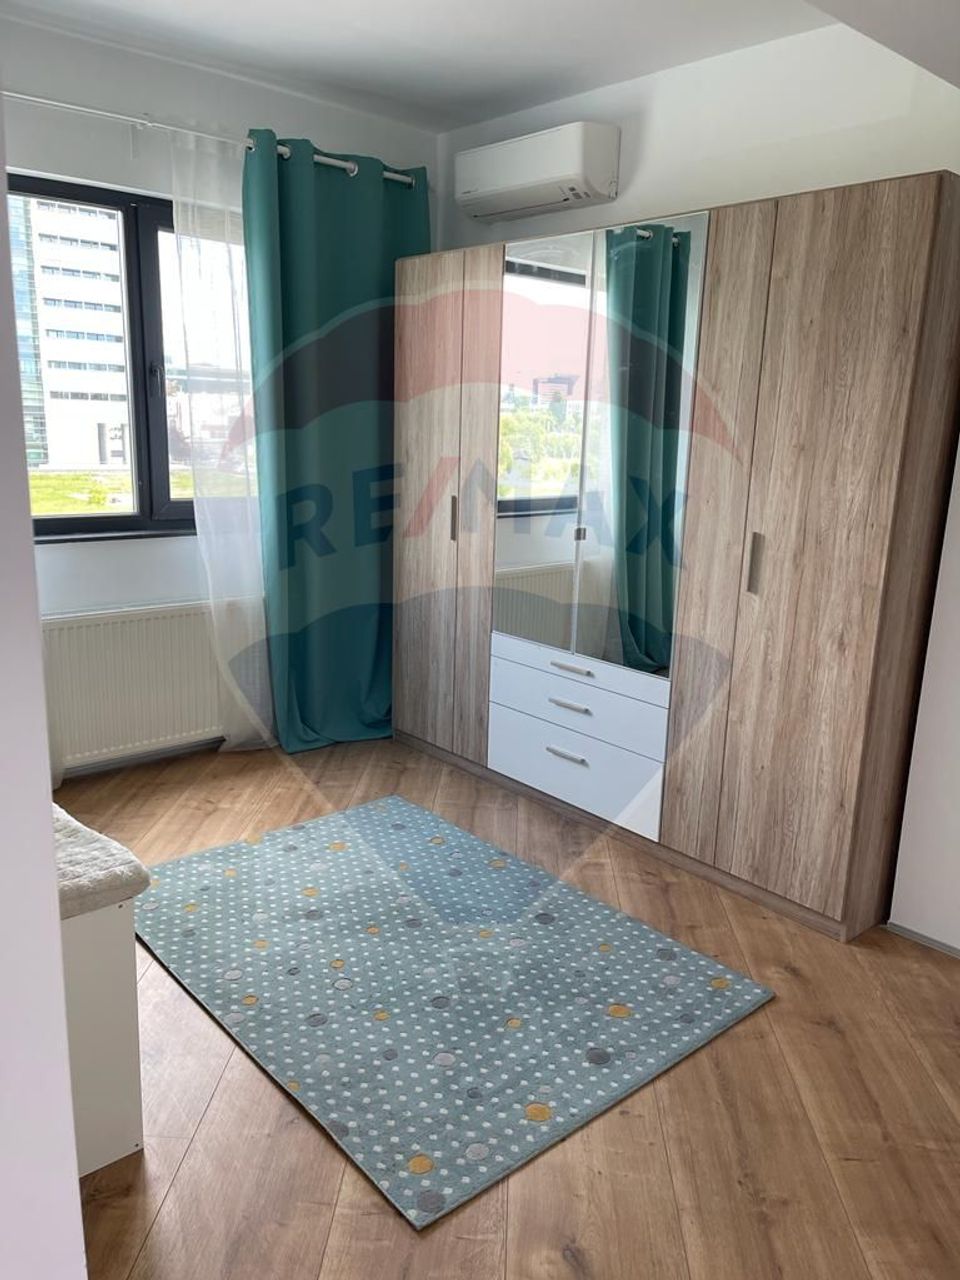 Apartment with 3 rooms for rent + parking space in Pipera area